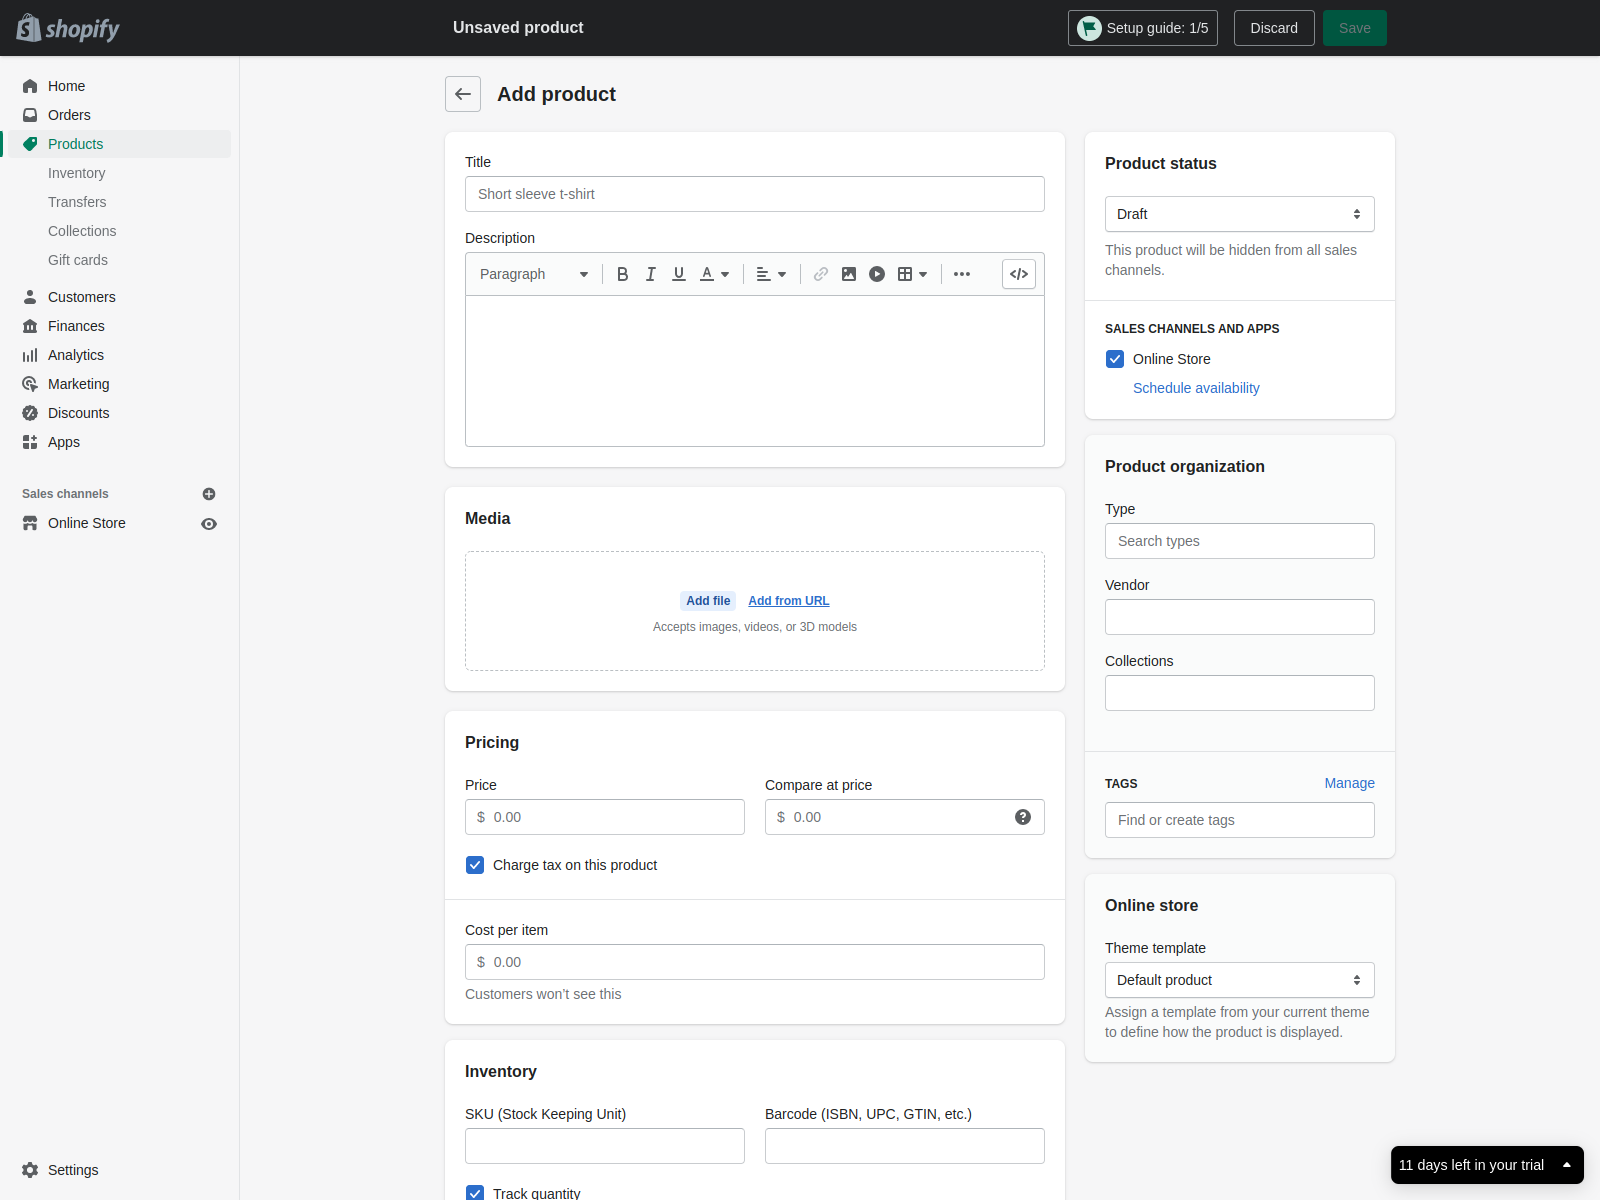 Shopify's product editor page